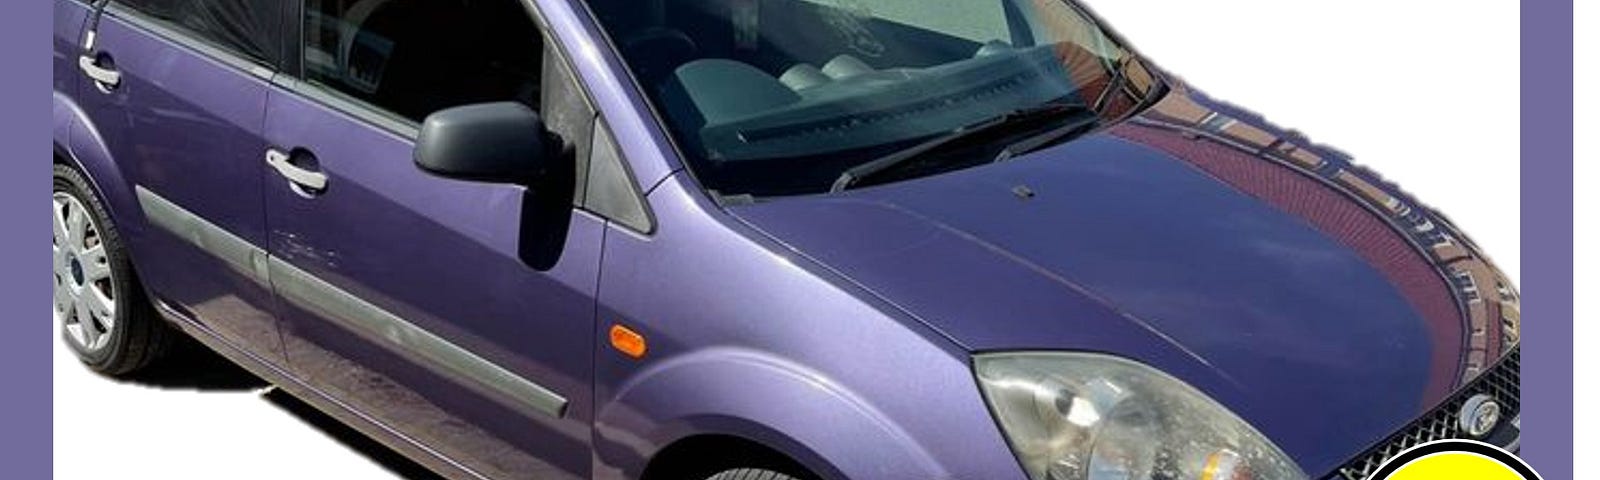 A photograph of the Purple Ford Fiesta we are getting, it has a smiley face over the number plate for privacy reasons.